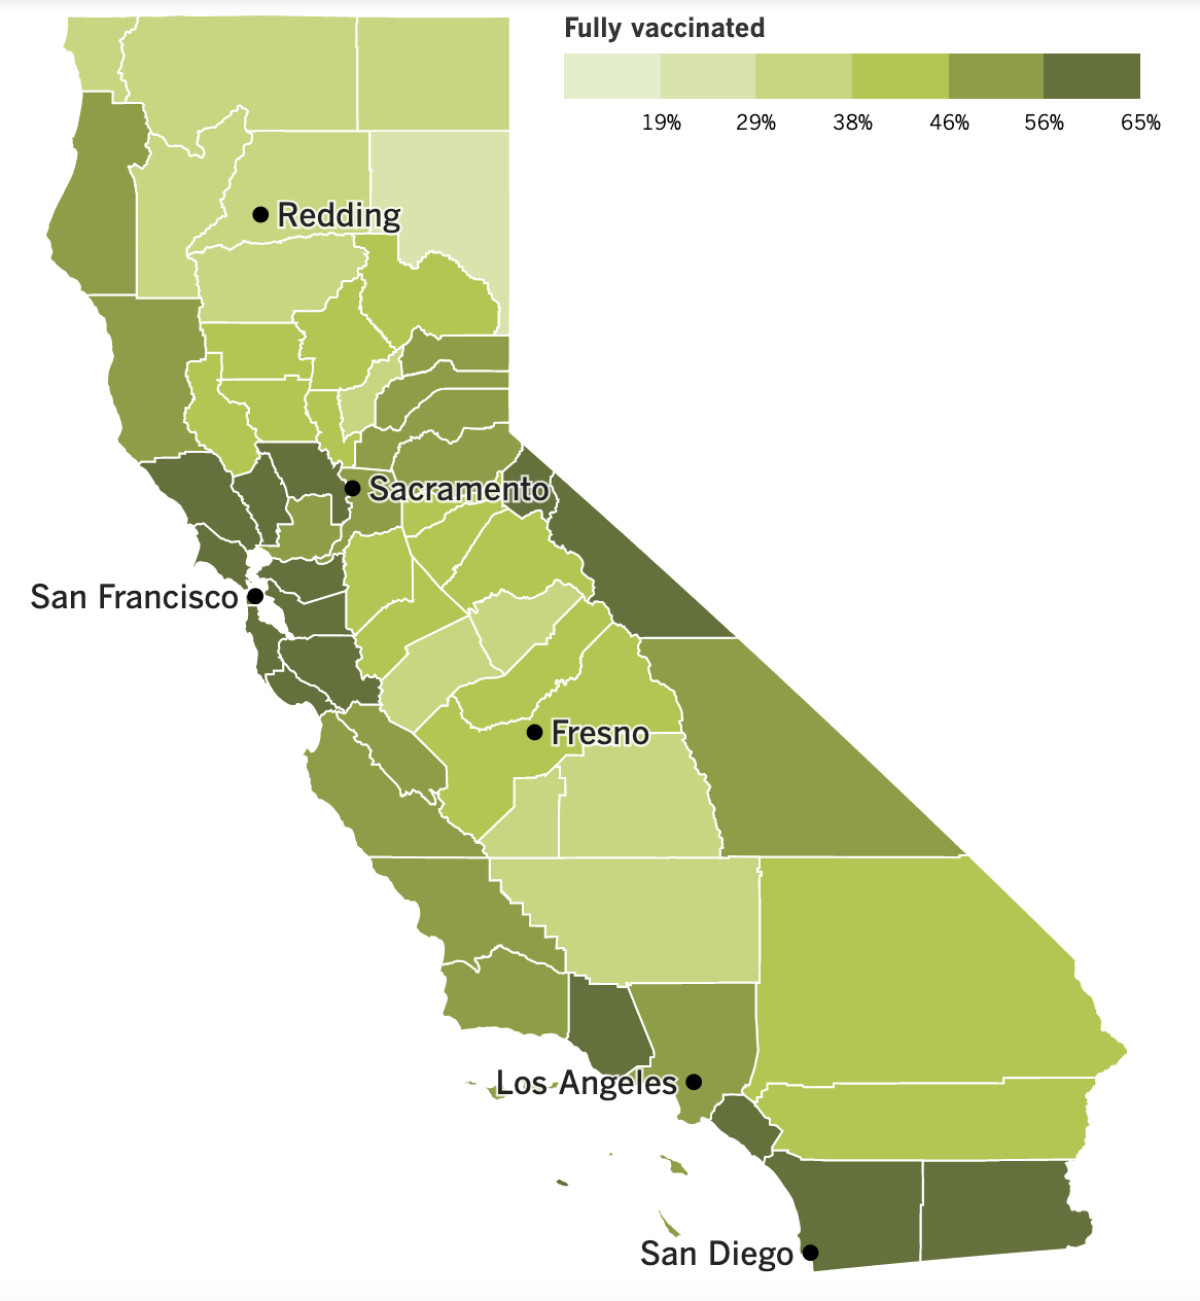 This map shows California's vaccination progress by county.